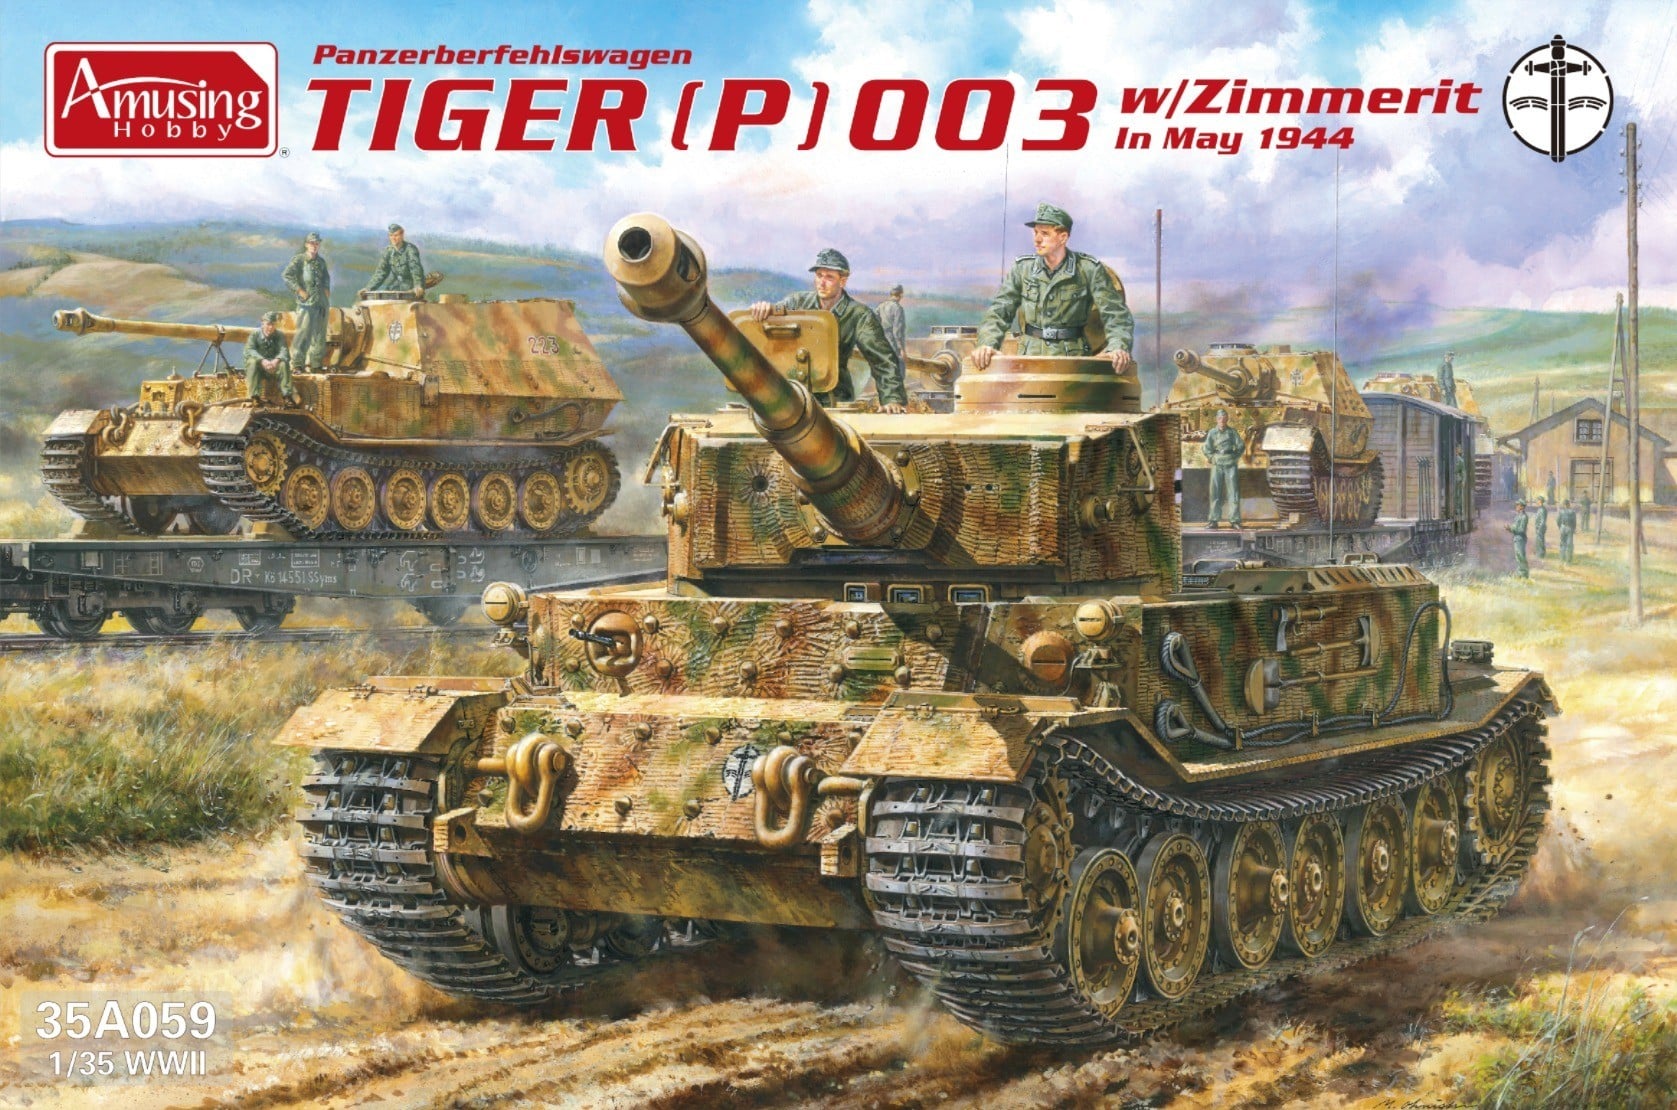 New Tiger from Amusing Hobby